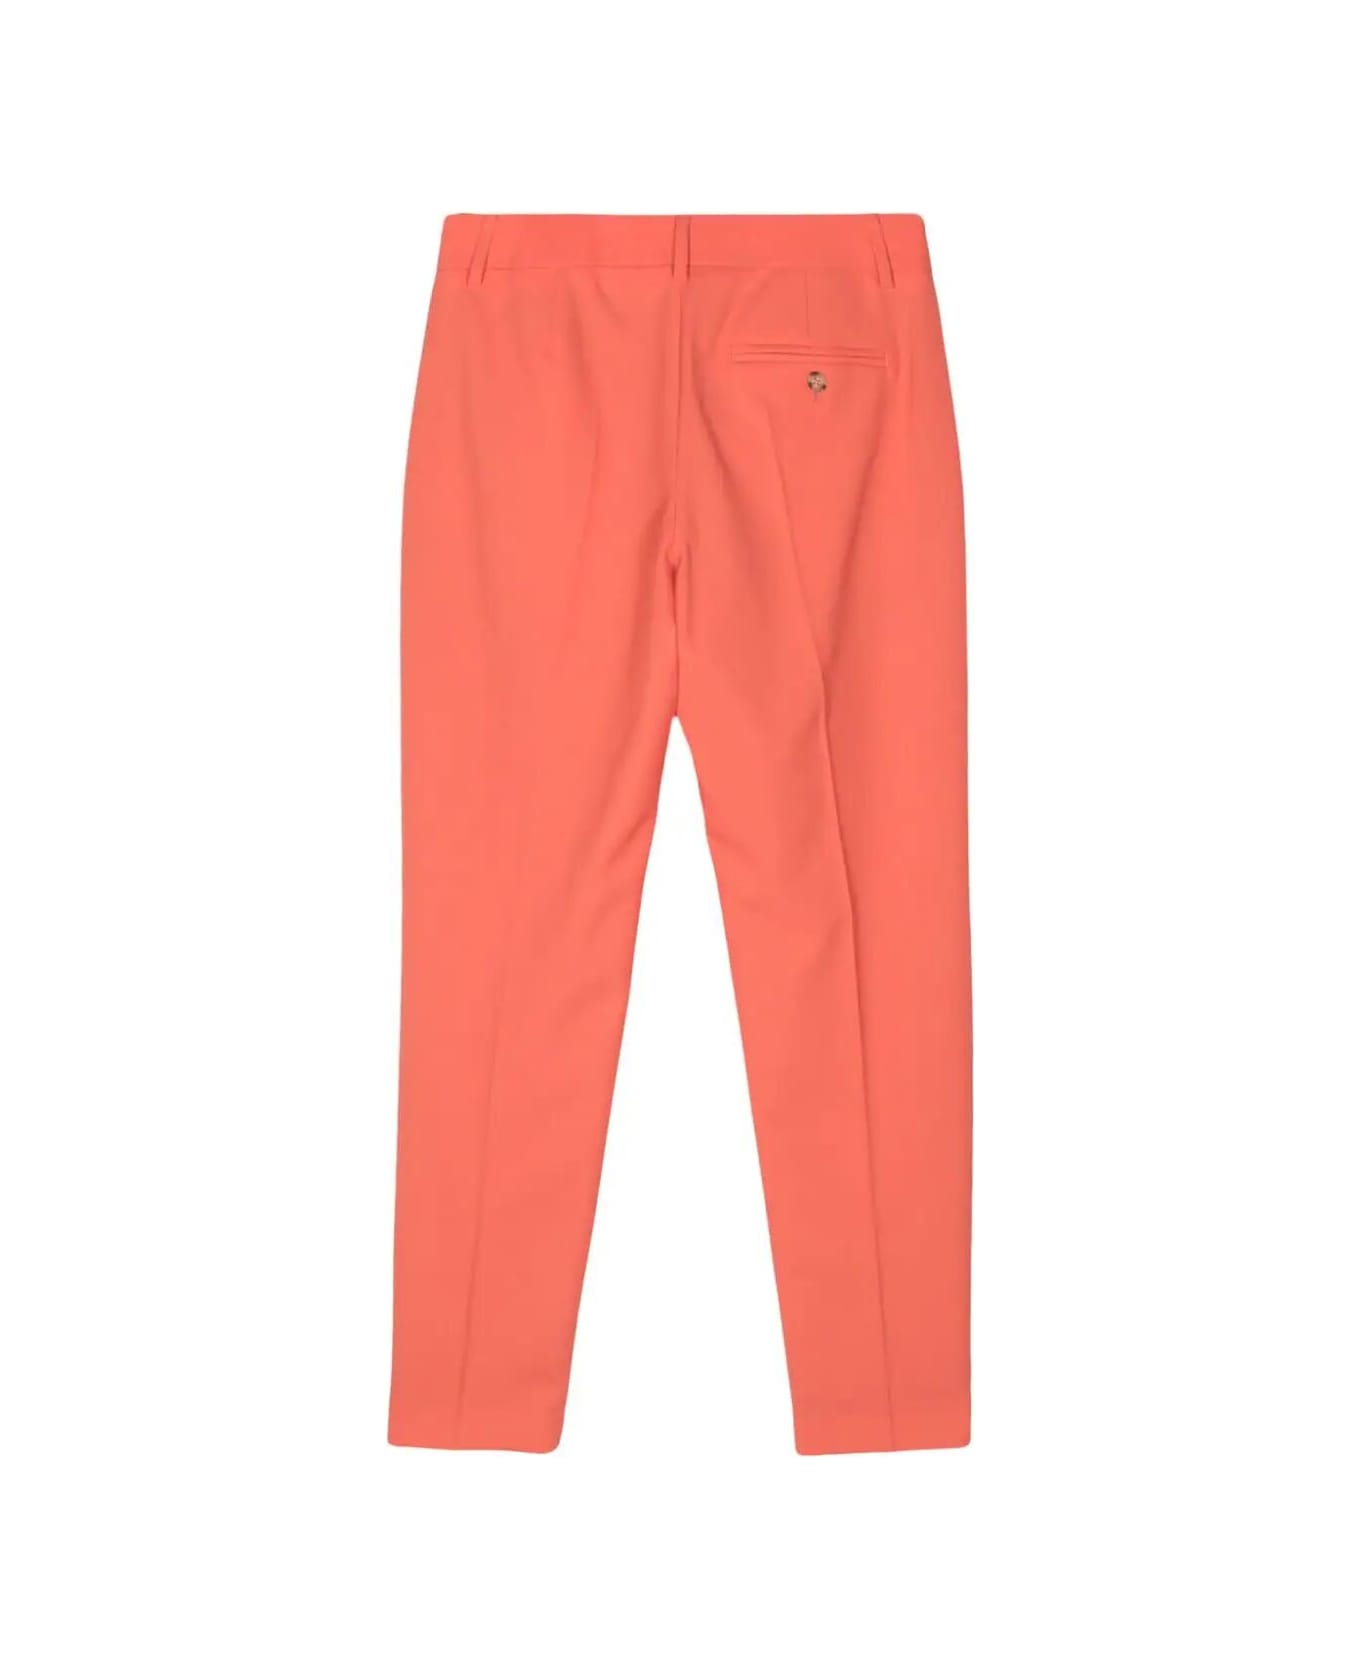 PS by Paul Smith Regular Trouser - Goose